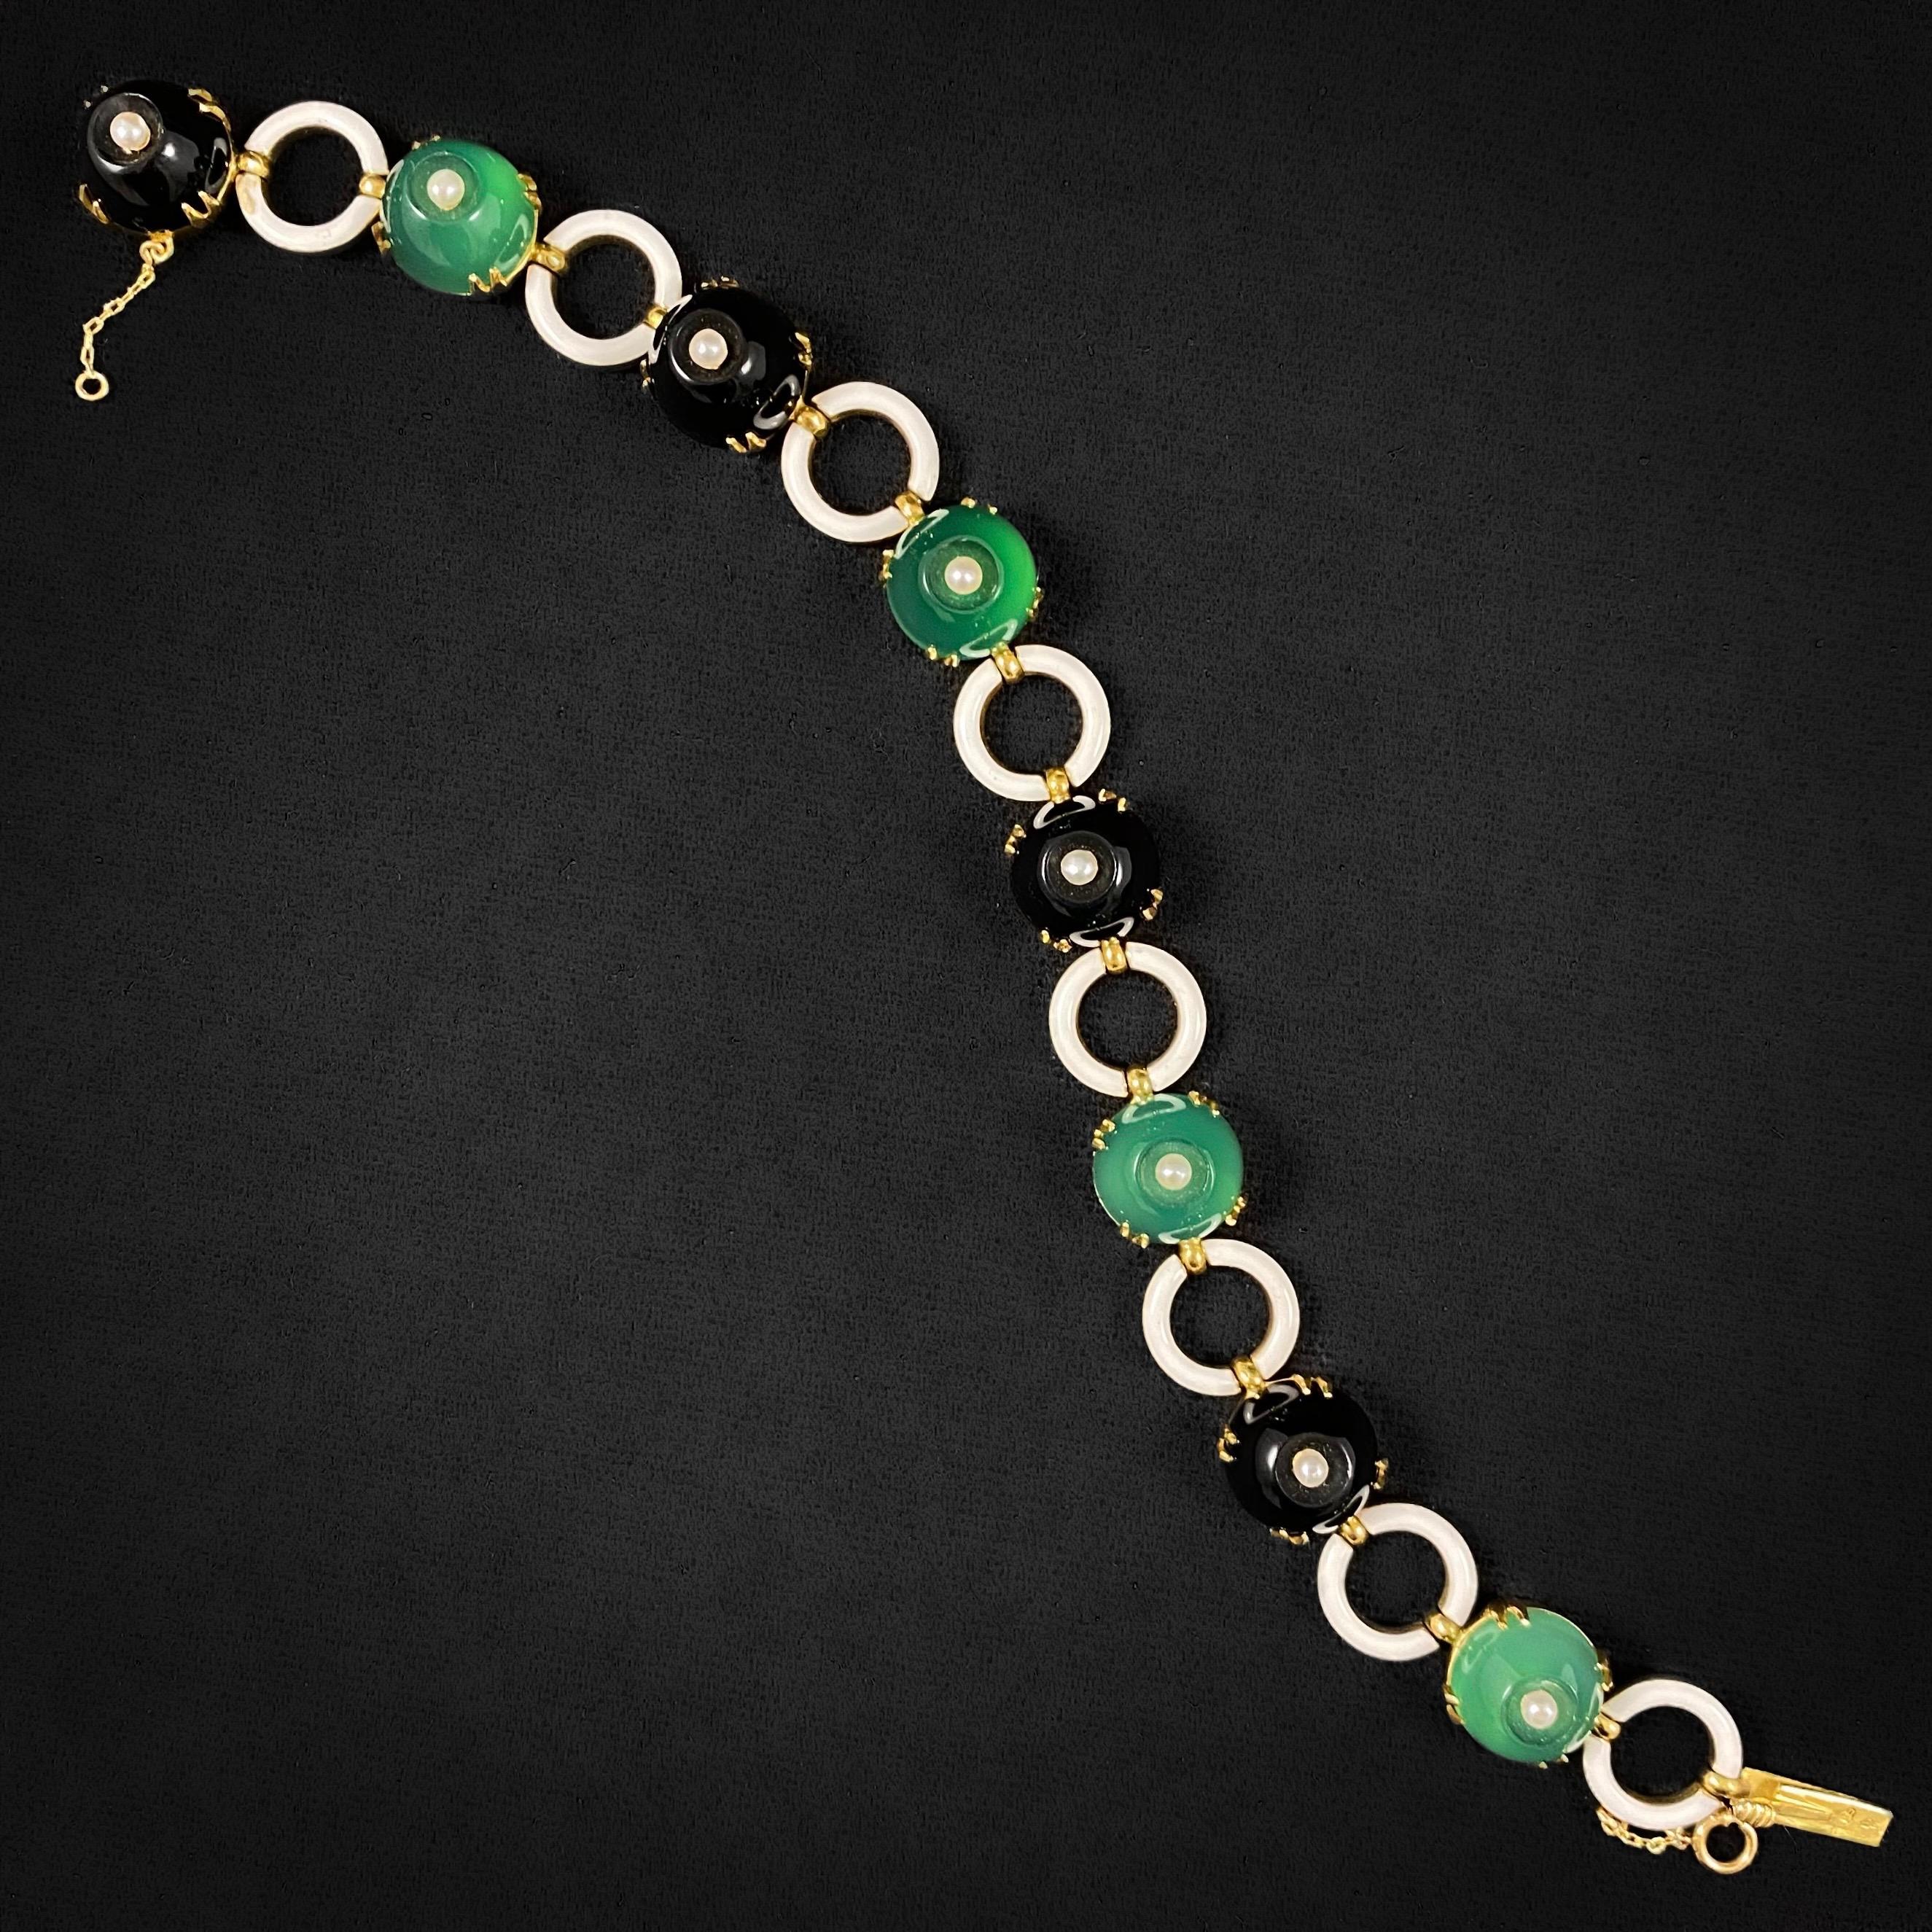 Leitão & Irmão Art Deco onyx, chrysoprase, pearl and white enamel openwork bracelet in 19.2kt yellow gold, made in the 1920s/1930s by the Portuguese crown jeweler. This jewel is composed by eight circular chrysoprase chalcedony and onyx cabochons